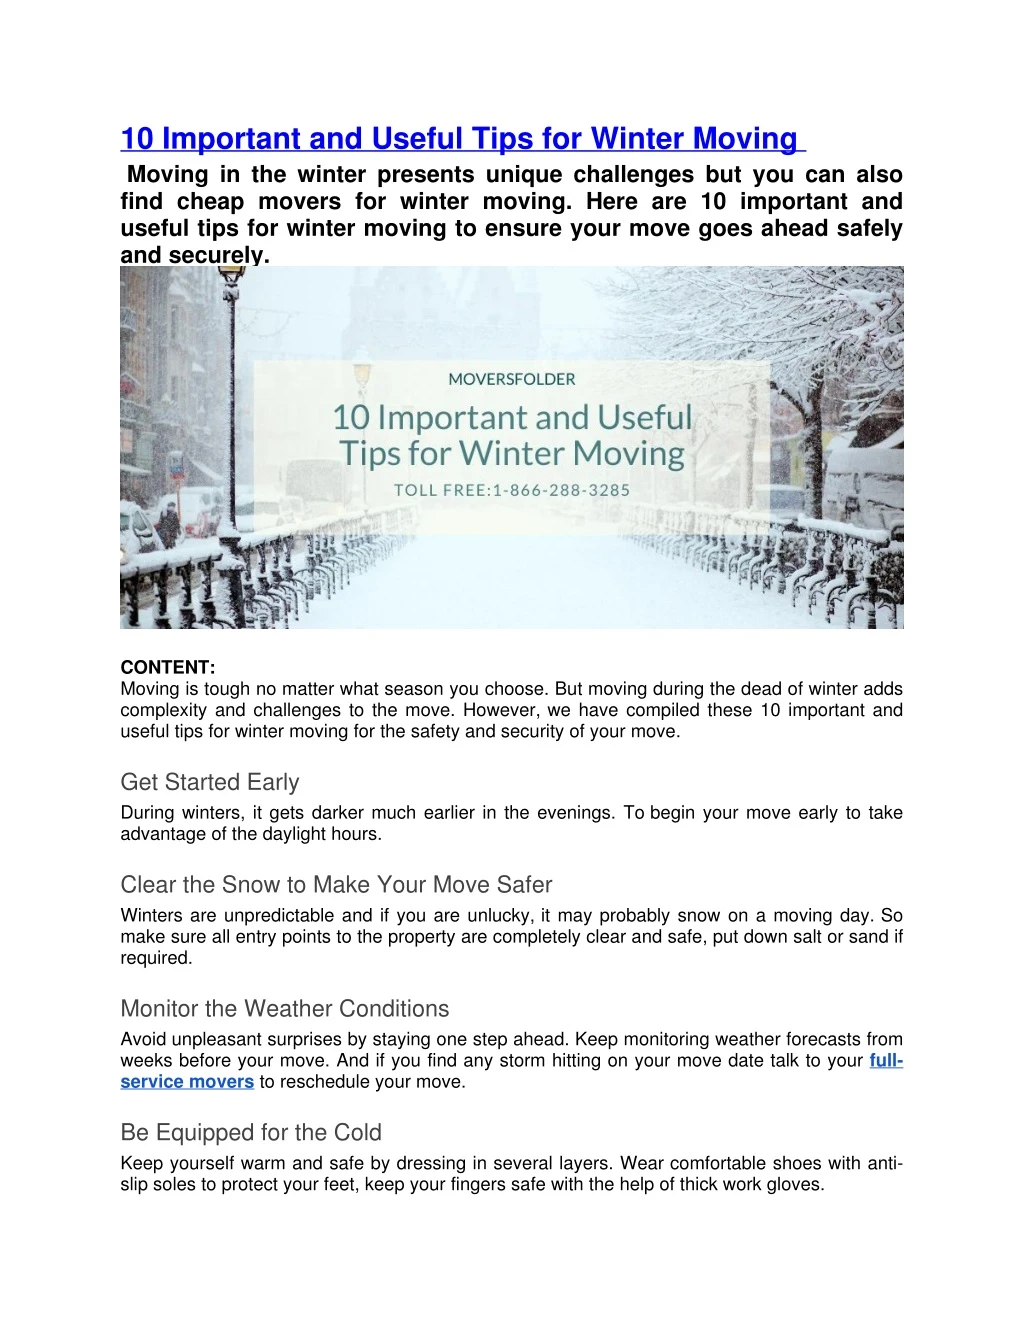 10 important and useful tips for winter moving